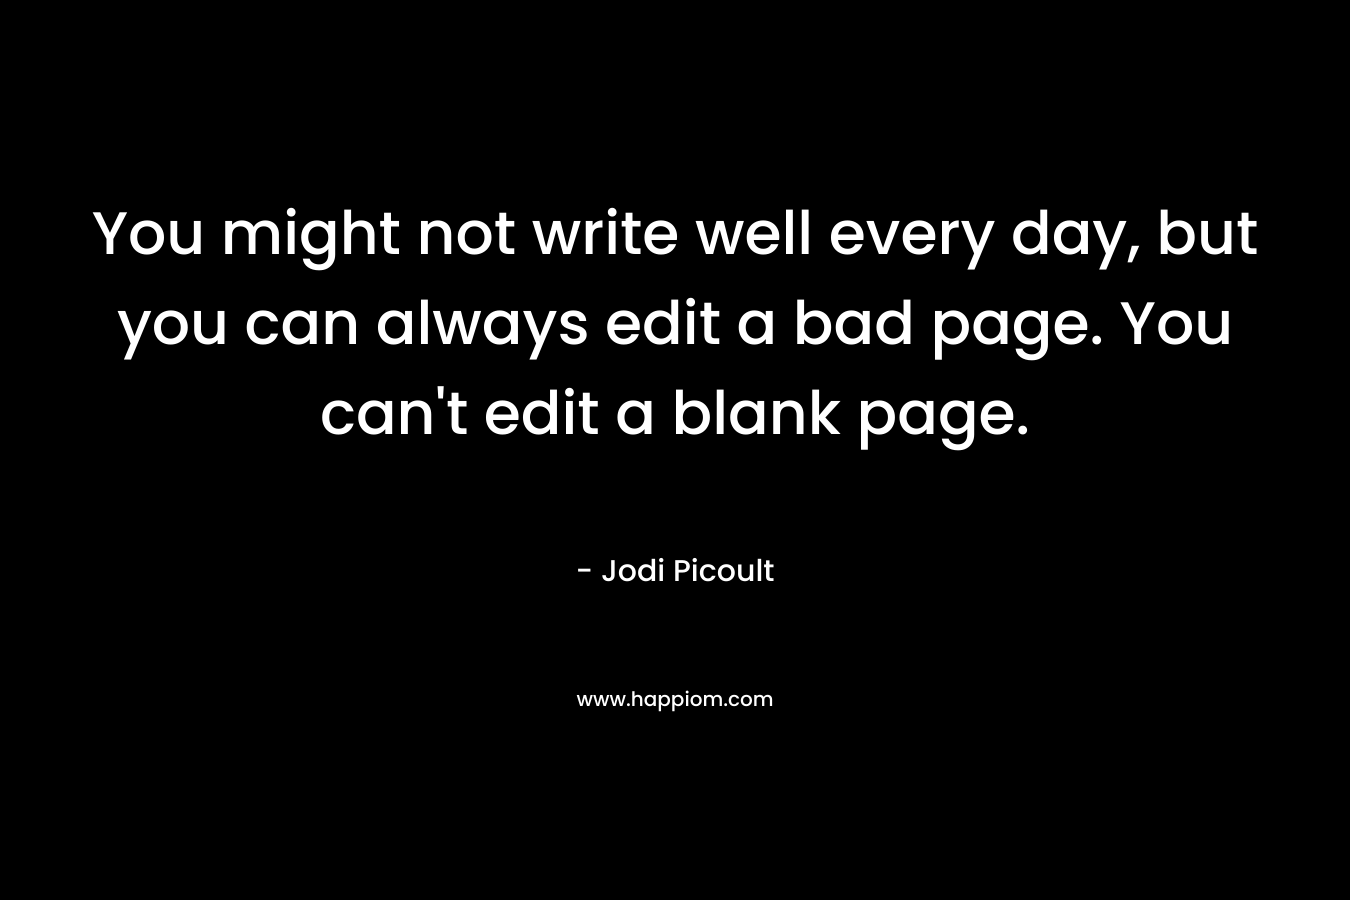 You might not write well every day, but you can always edit a bad page. You can’t edit a blank page. – Jodi Picoult